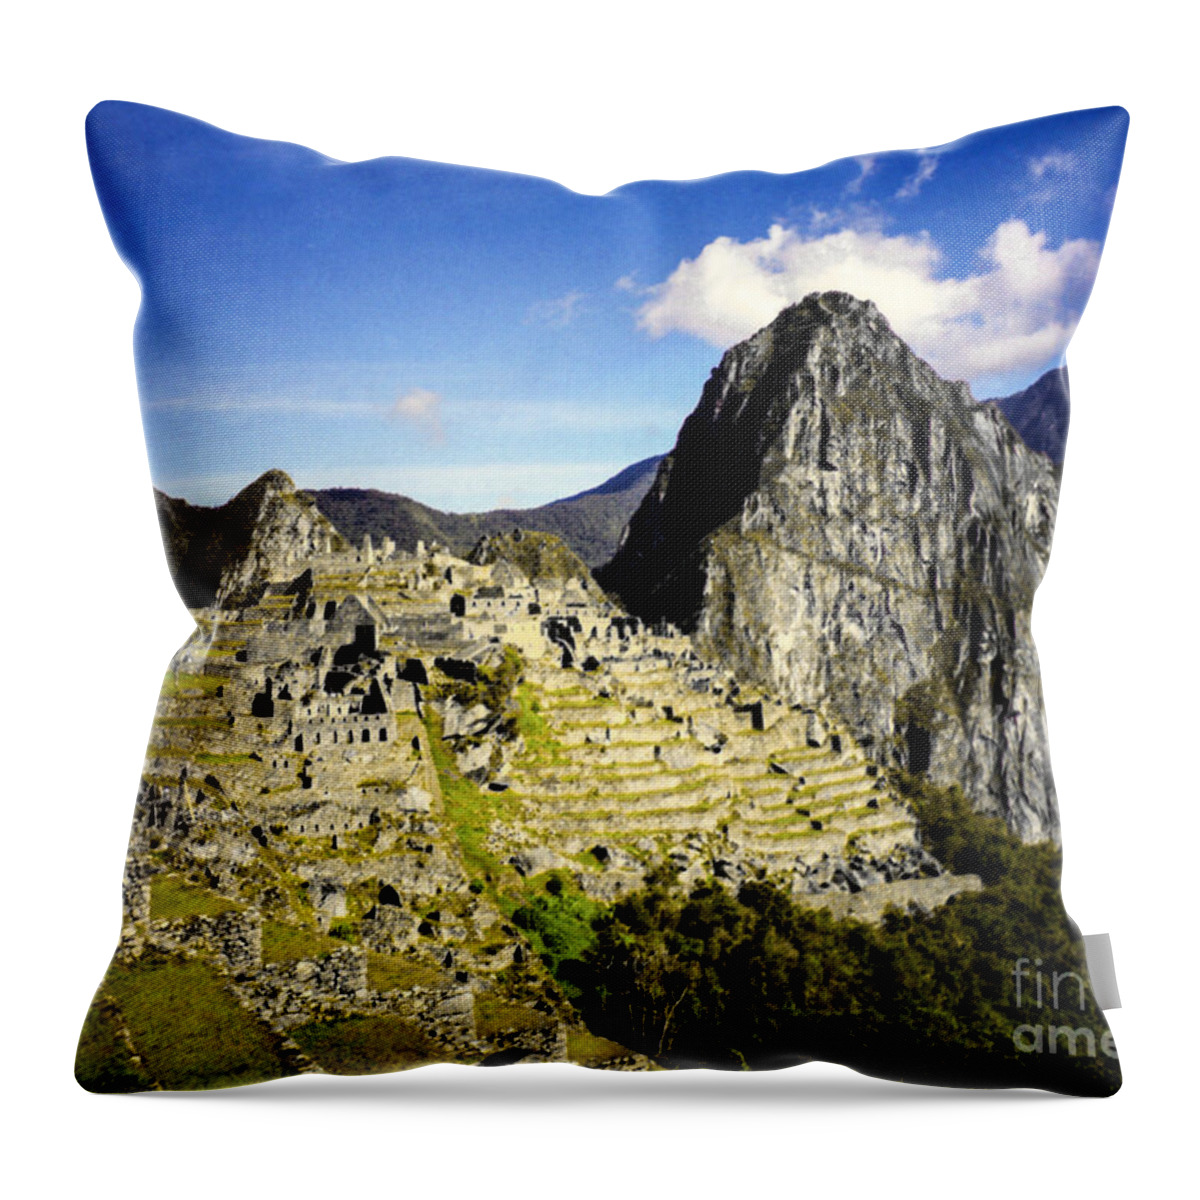 Machu Picchu Throw Pillow featuring the photograph The Lost City by Suzanne Luft